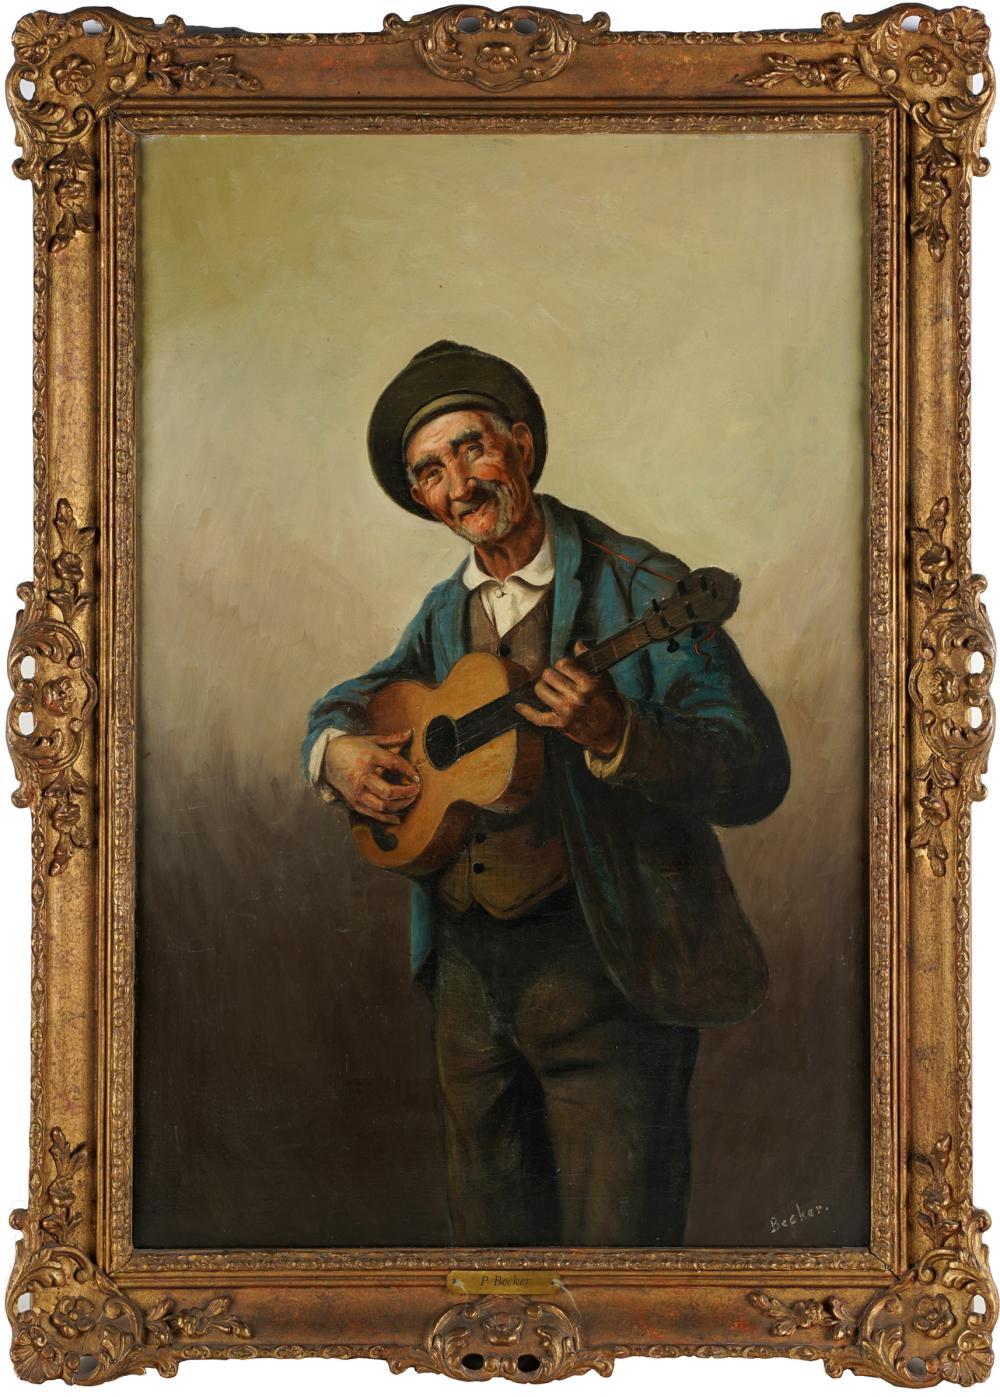 P. BECKER: THE OLD GUITARISToil on canvas;